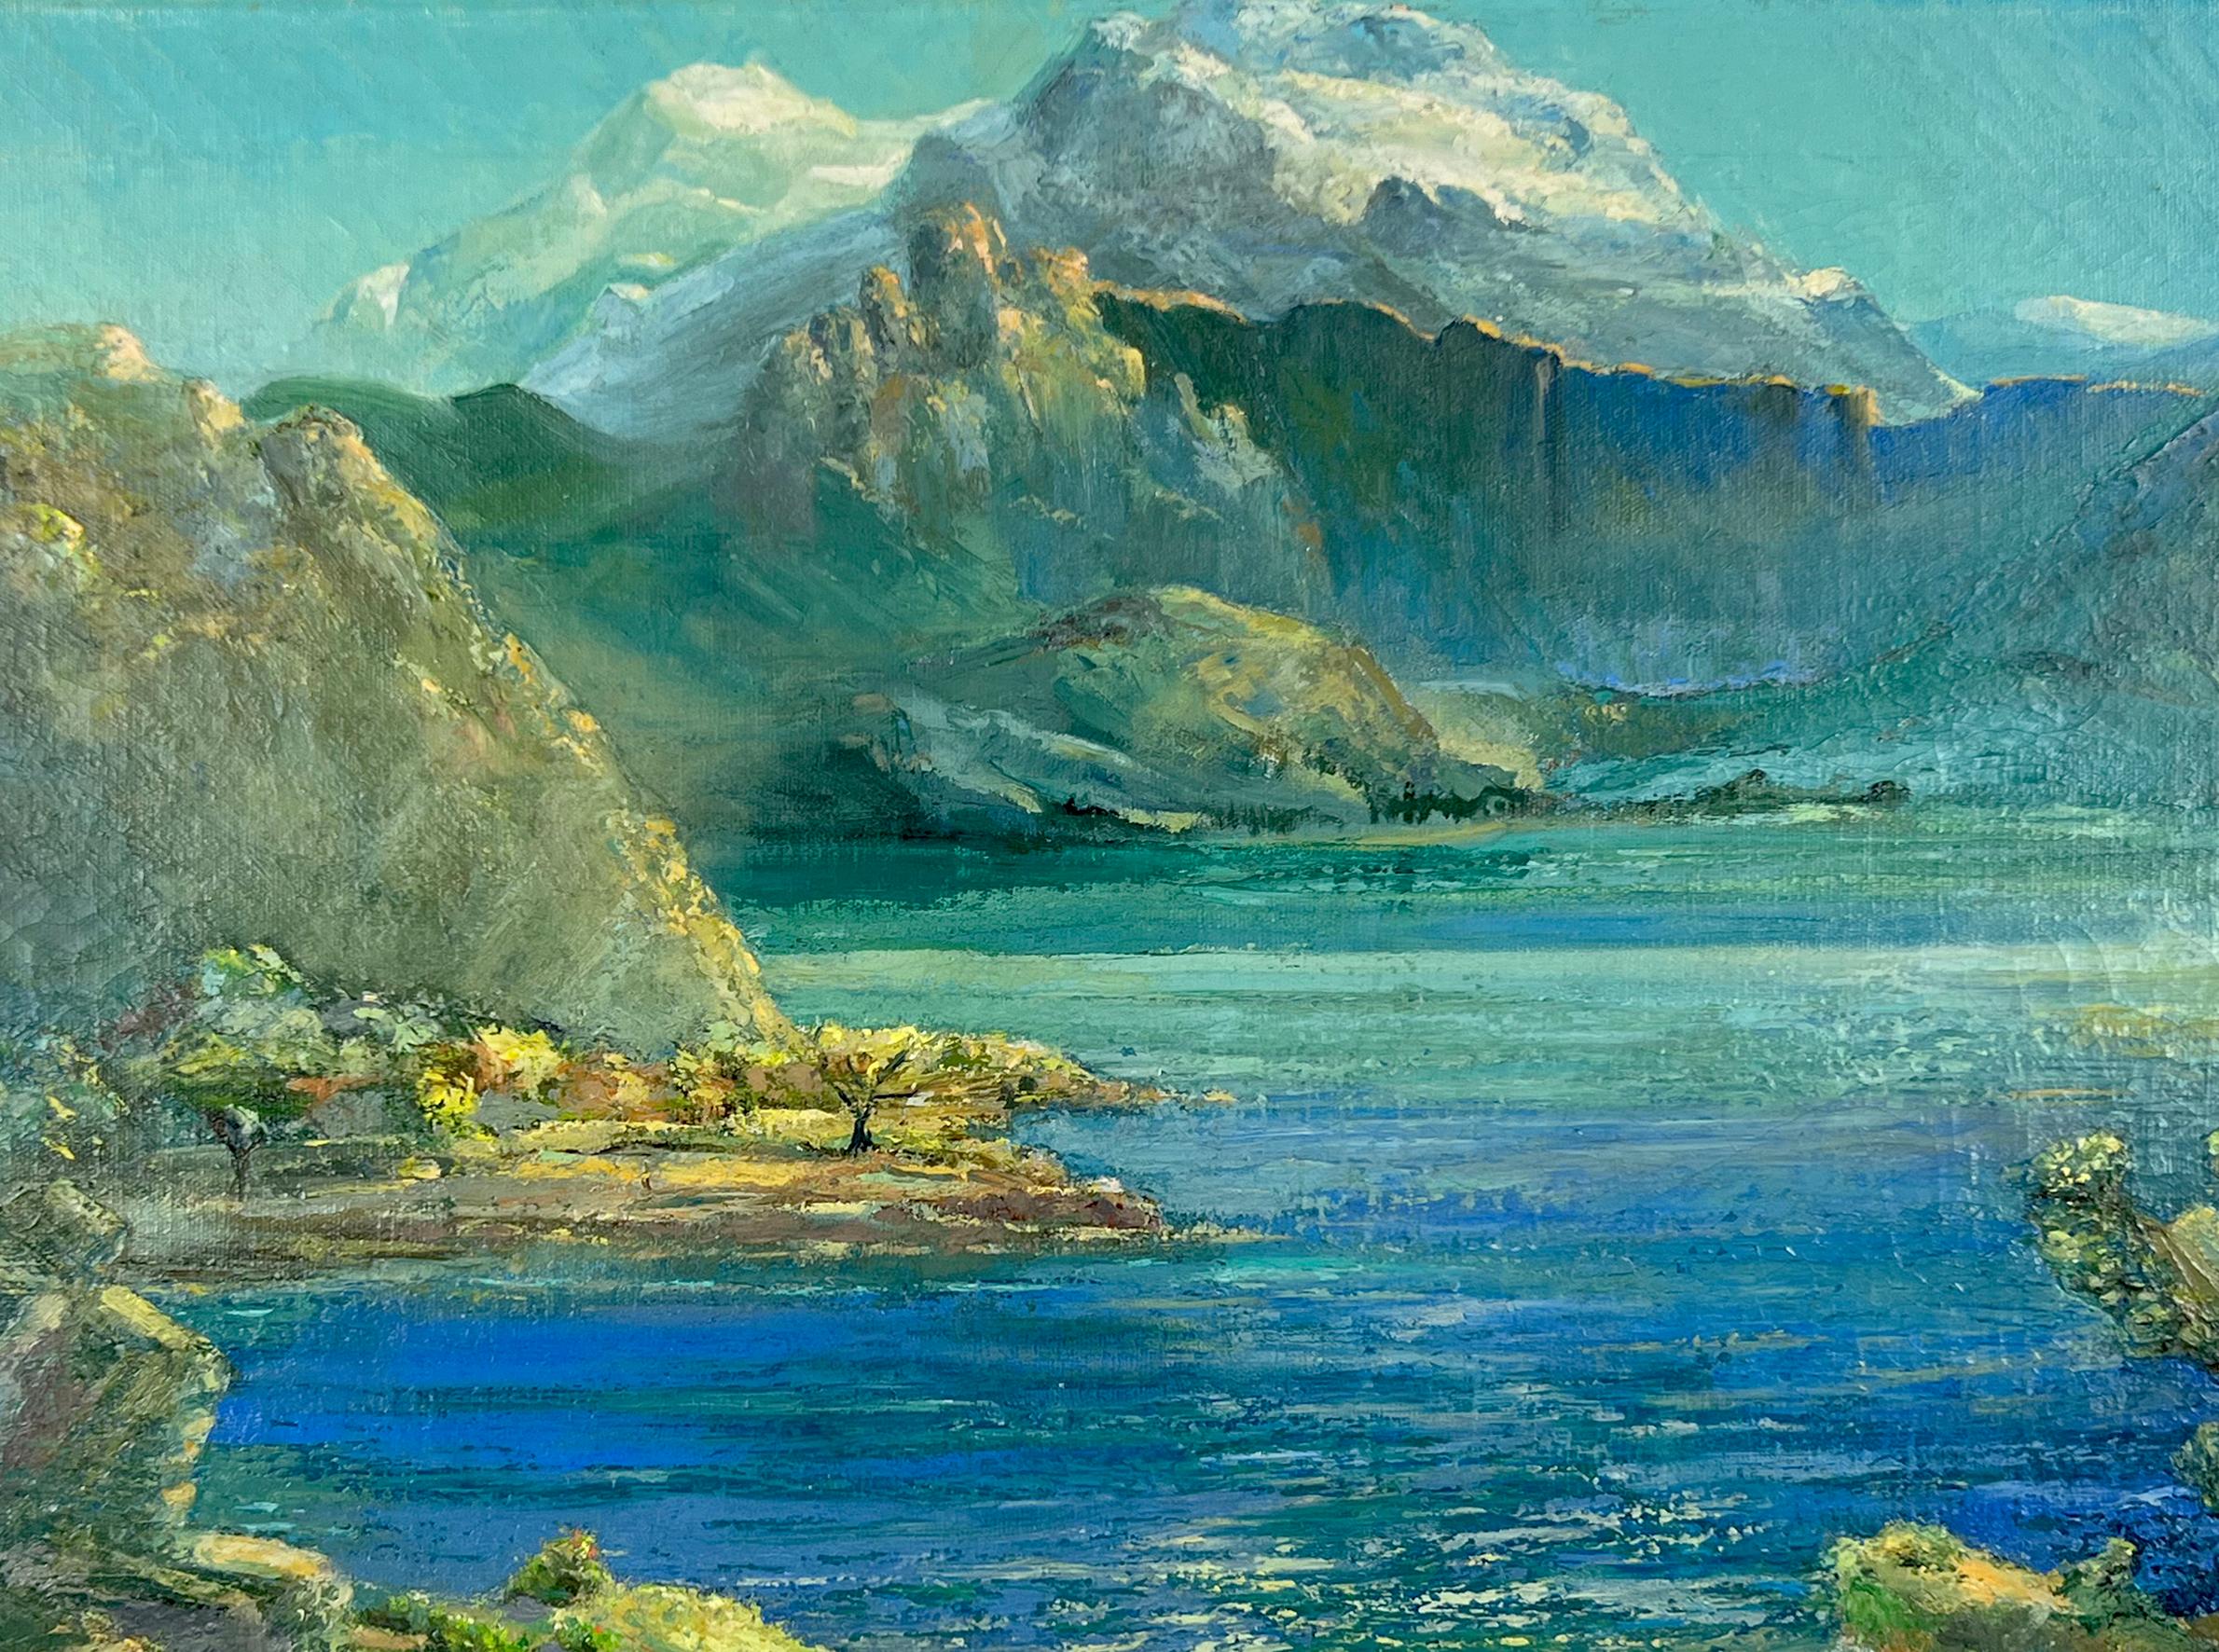 Blue Lake in the Rockies and Hunter - Oil on Linen - Painting by Verne Byer